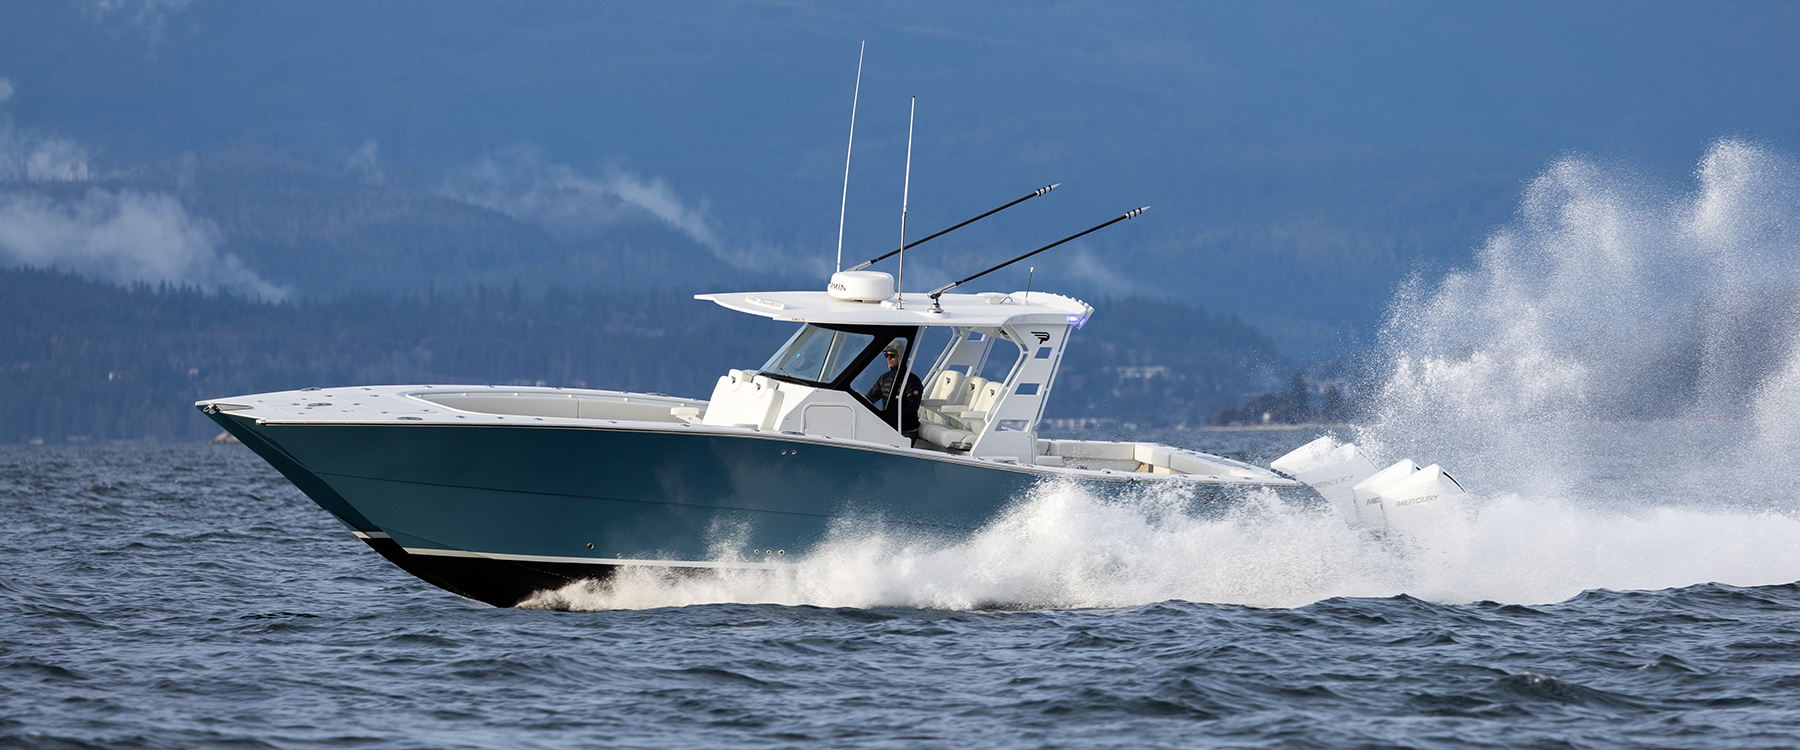 7 Reasons to Use Aluminum Boats for Saltwater Fishing